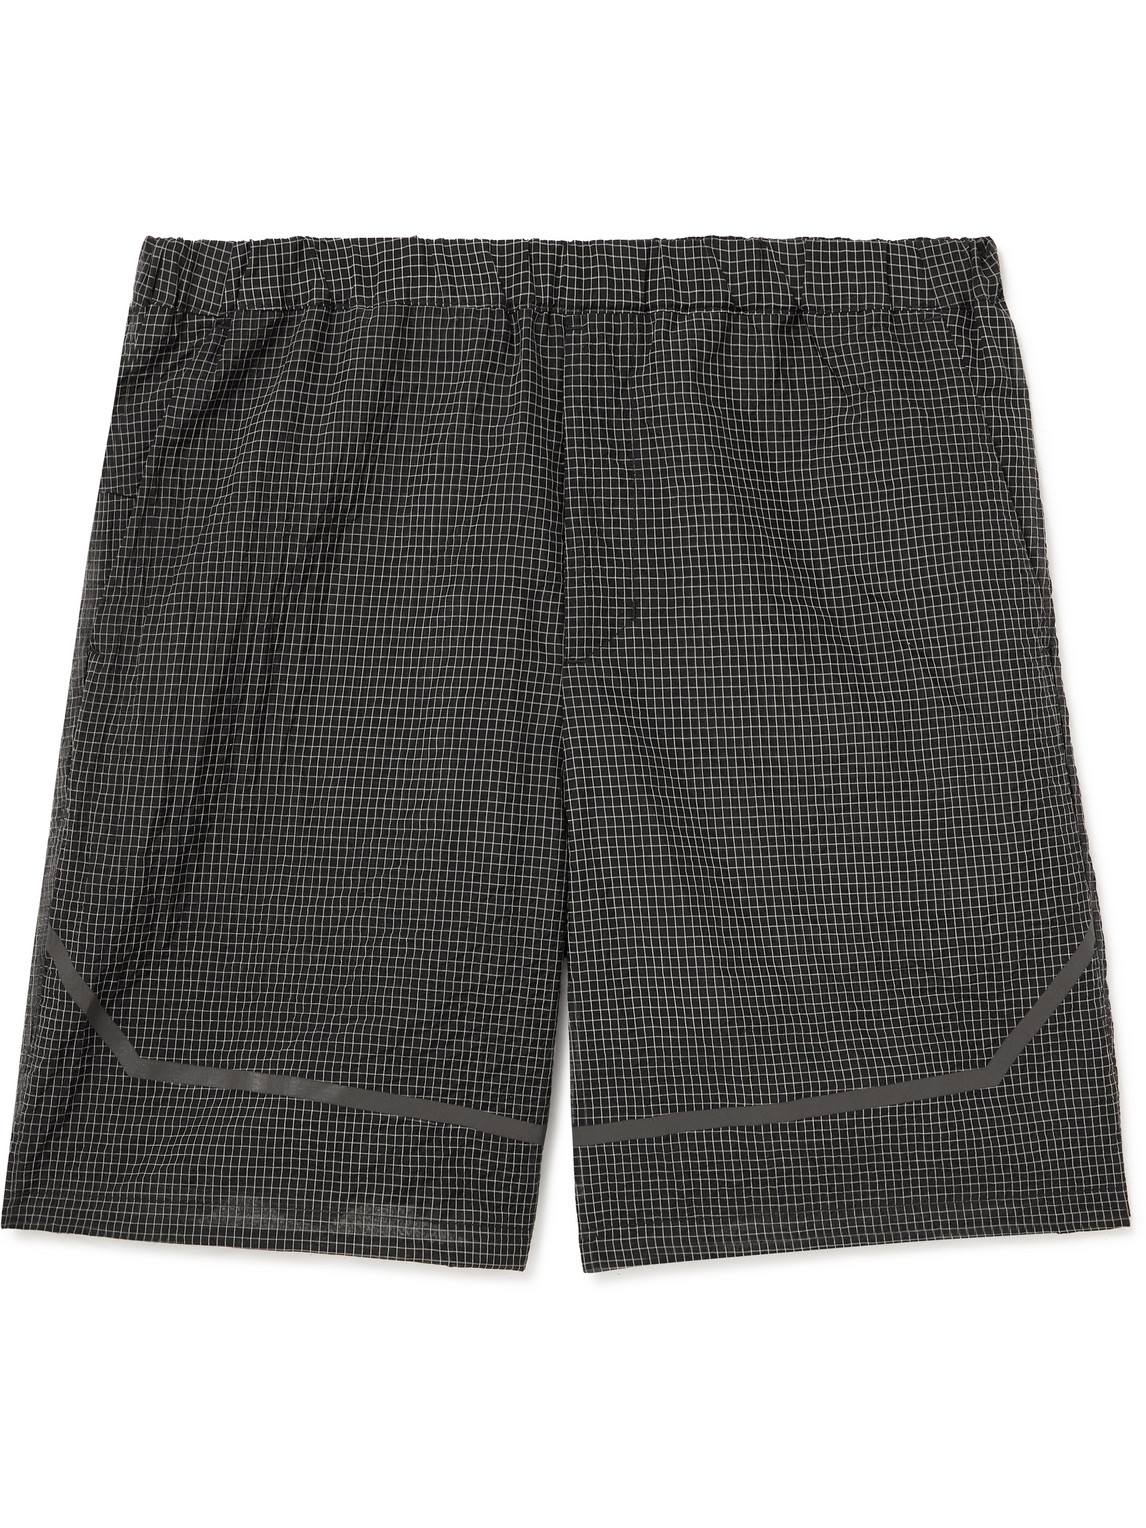 NORSE PROJECTS ARKTISK STRAIGHT-LEG CHECKED RIPSTOP SHORTS